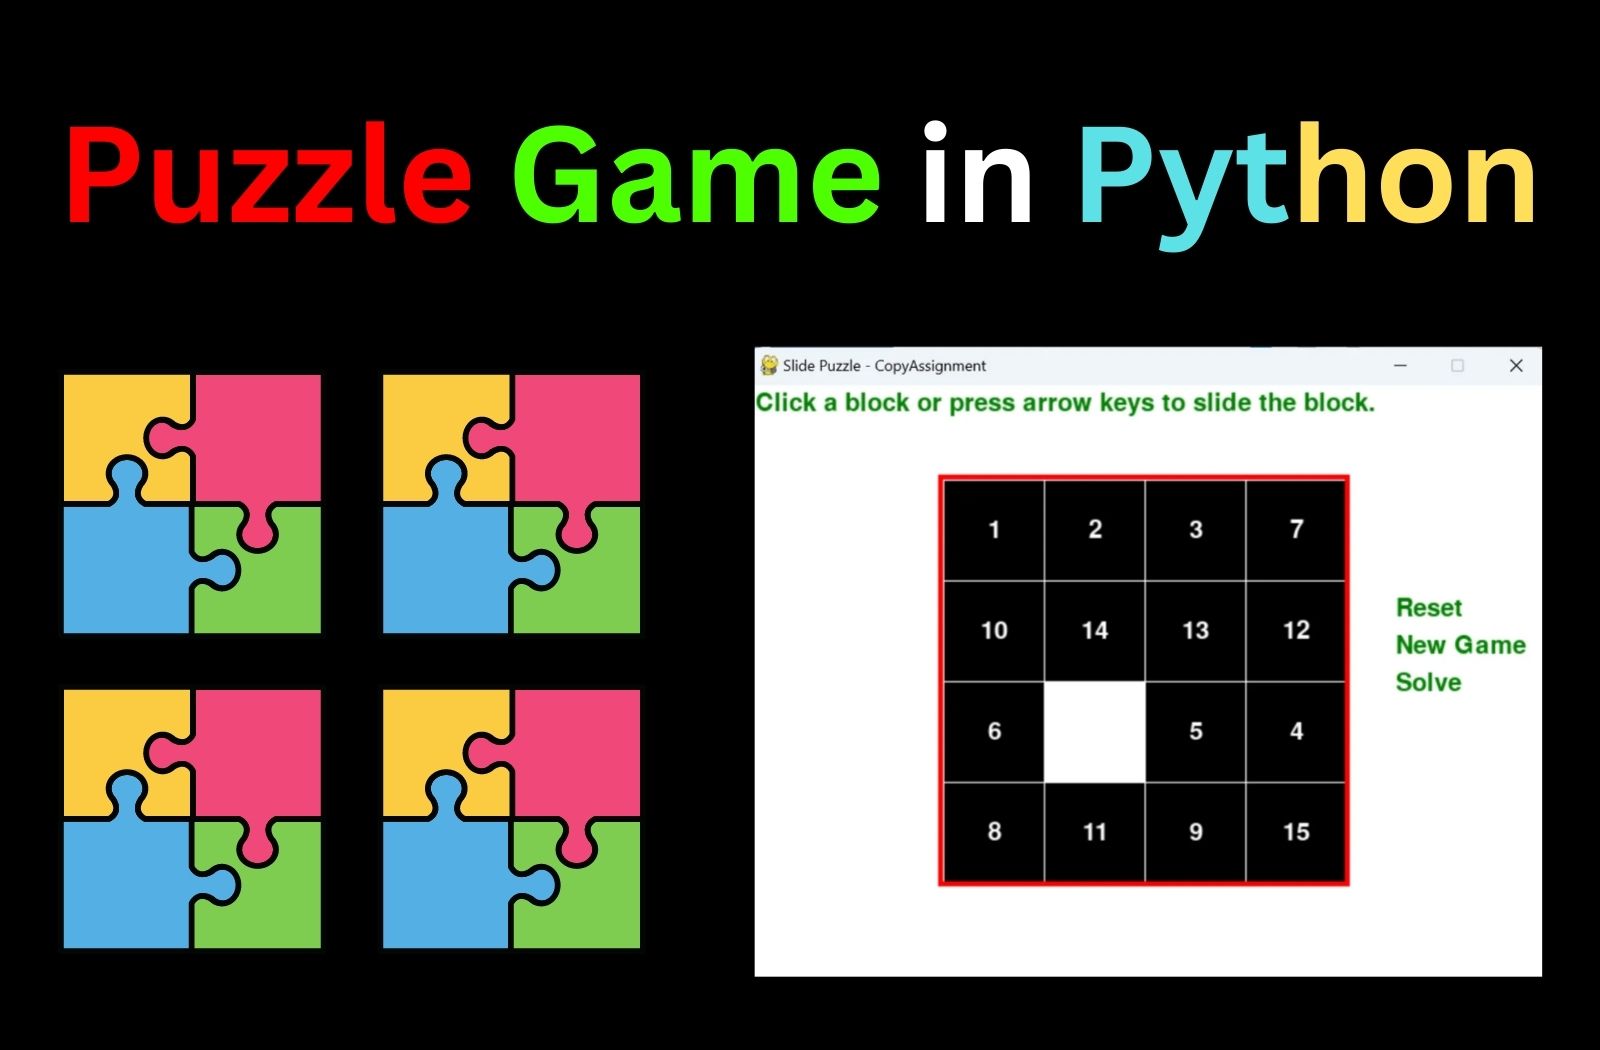 Snake Game In C++ - CopyAssignment